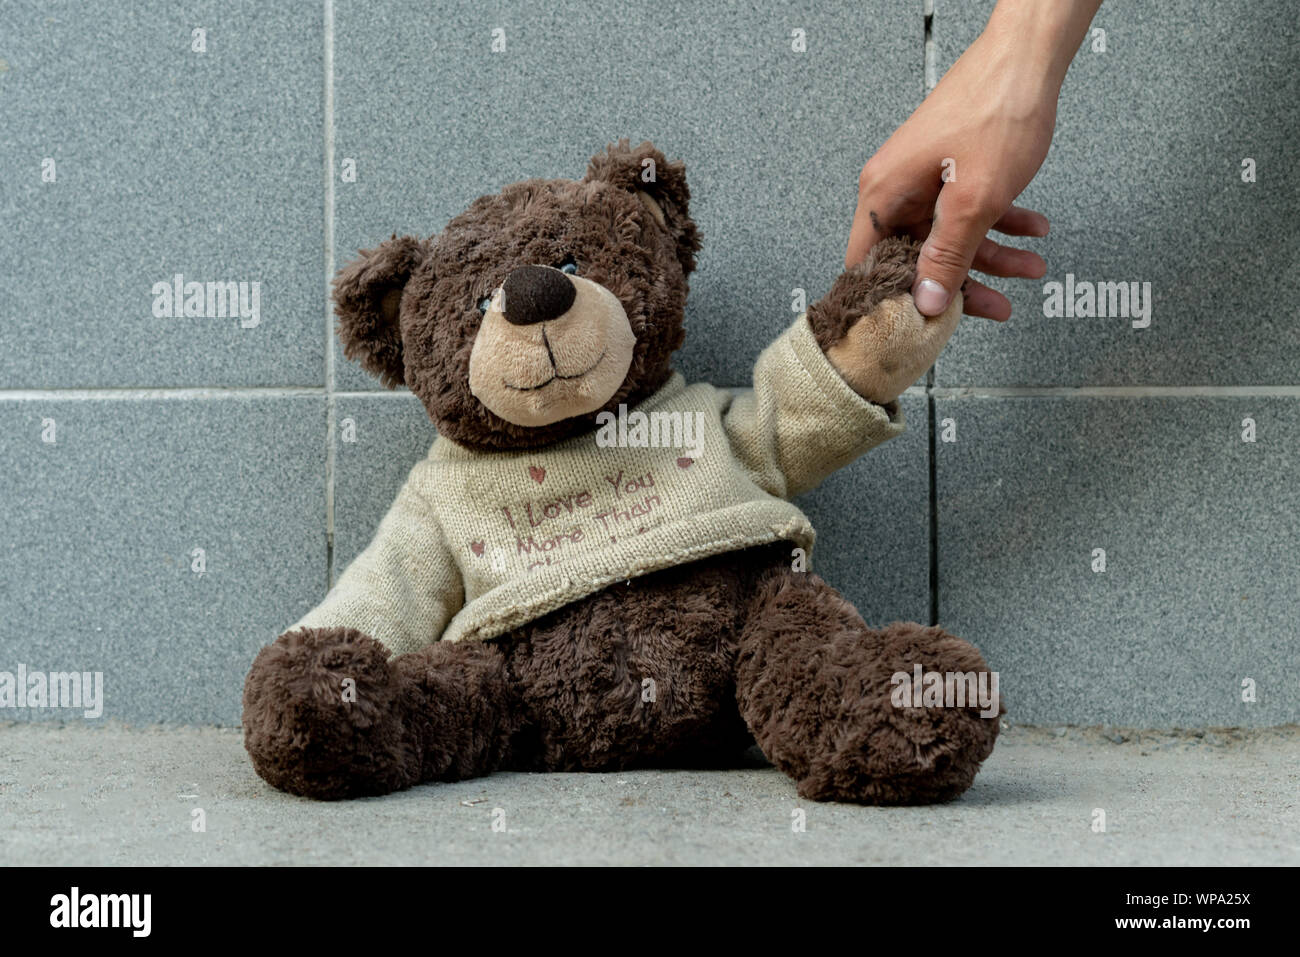 human hand grab the dirty teddy bear from the ground outdoors, lost concepts Stock Photo